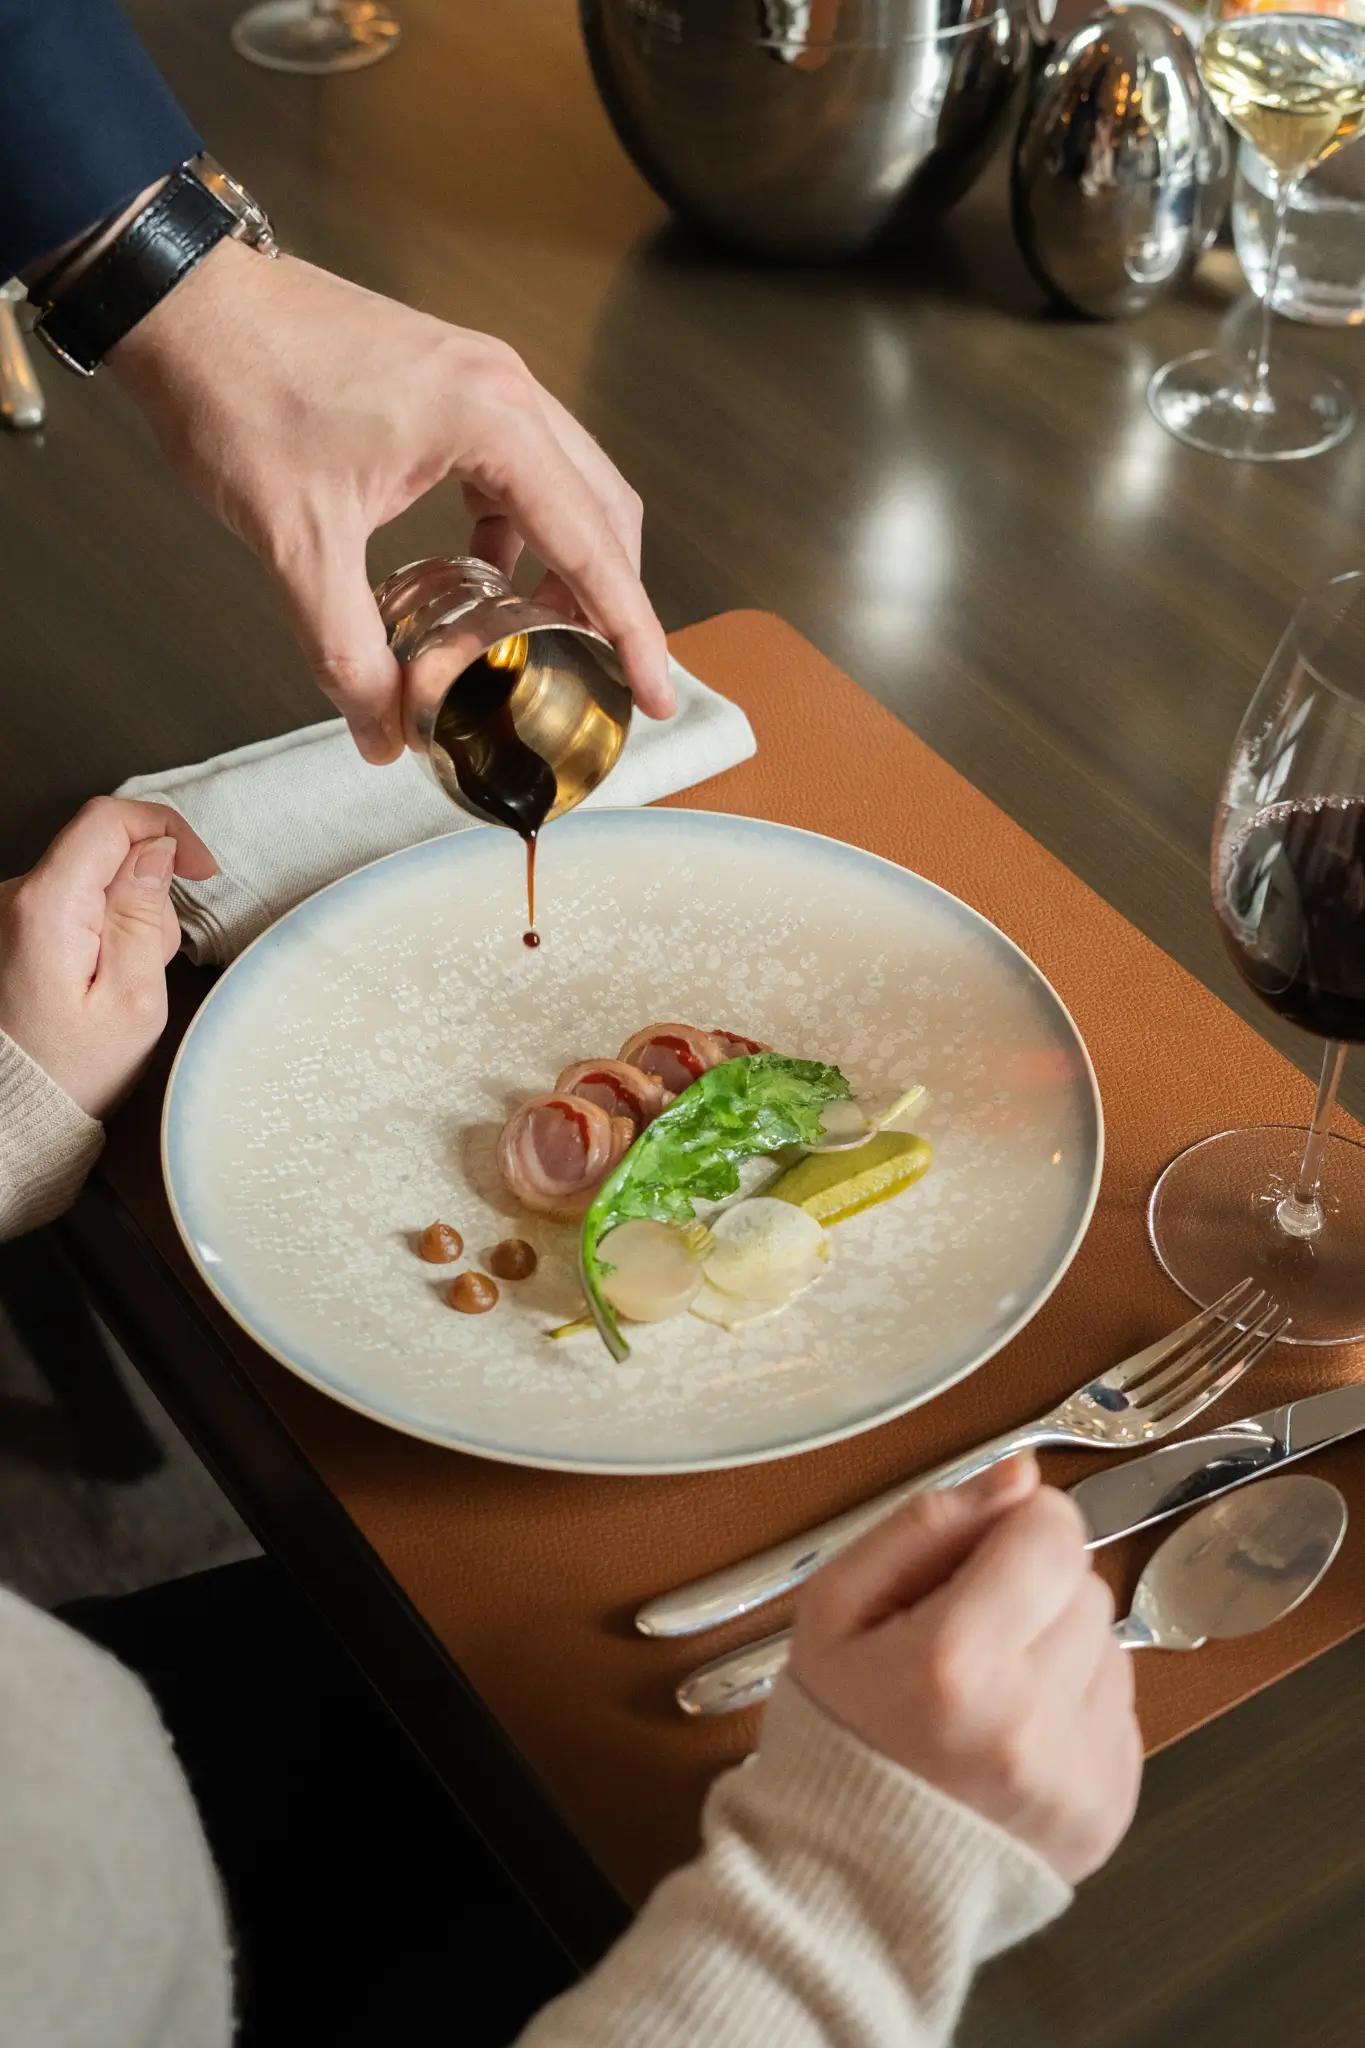 Server pouring sauce over a plated dish at Restaurant Trente-Trois, a Michelin Star restaurant in Paris